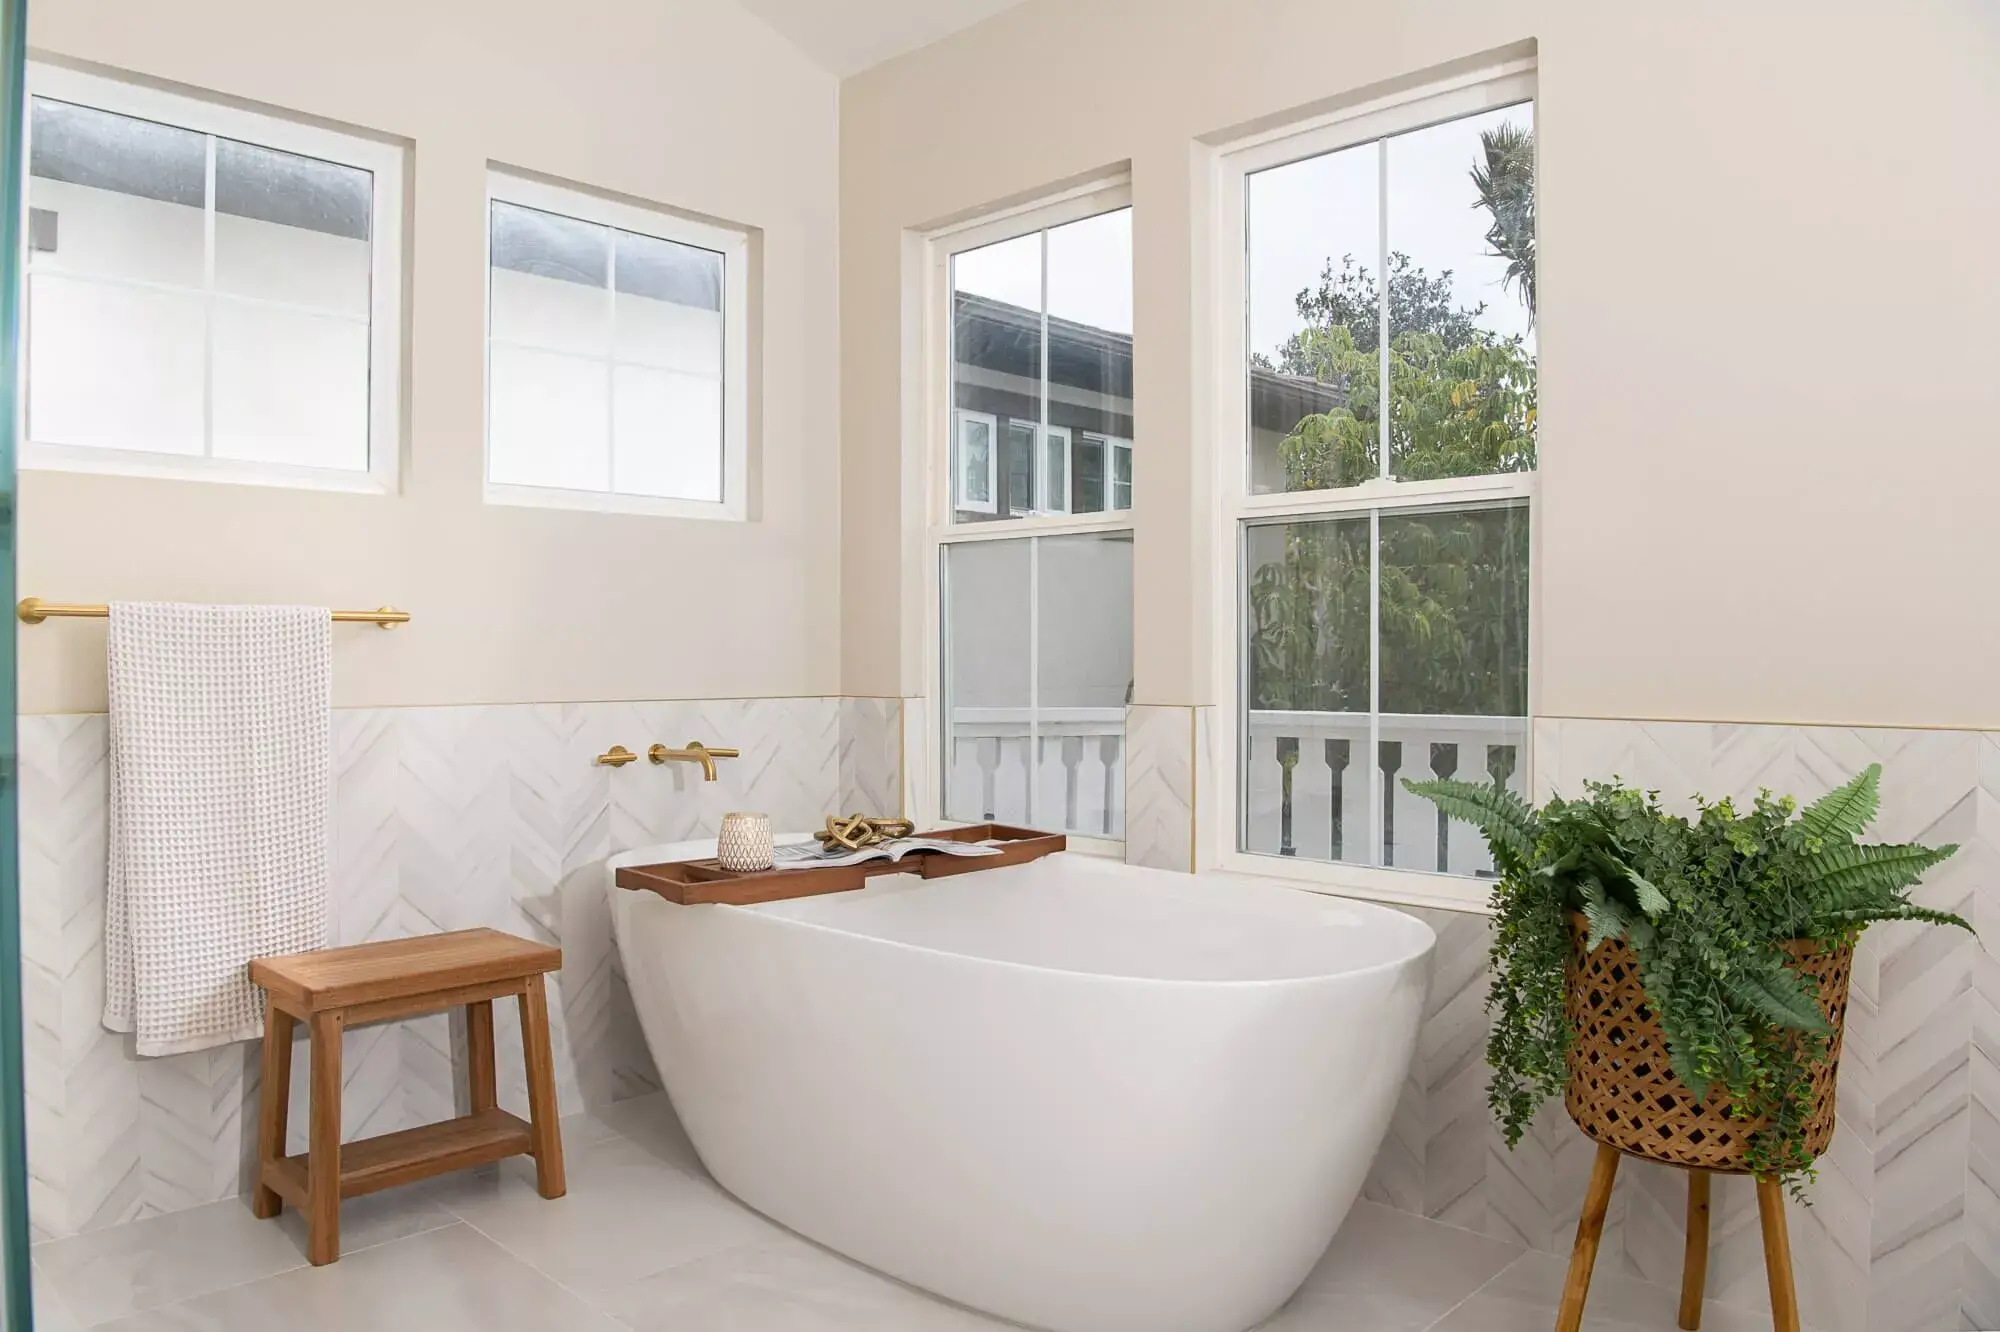 Contemporary kitchen and bath trends include having a freestanding tub